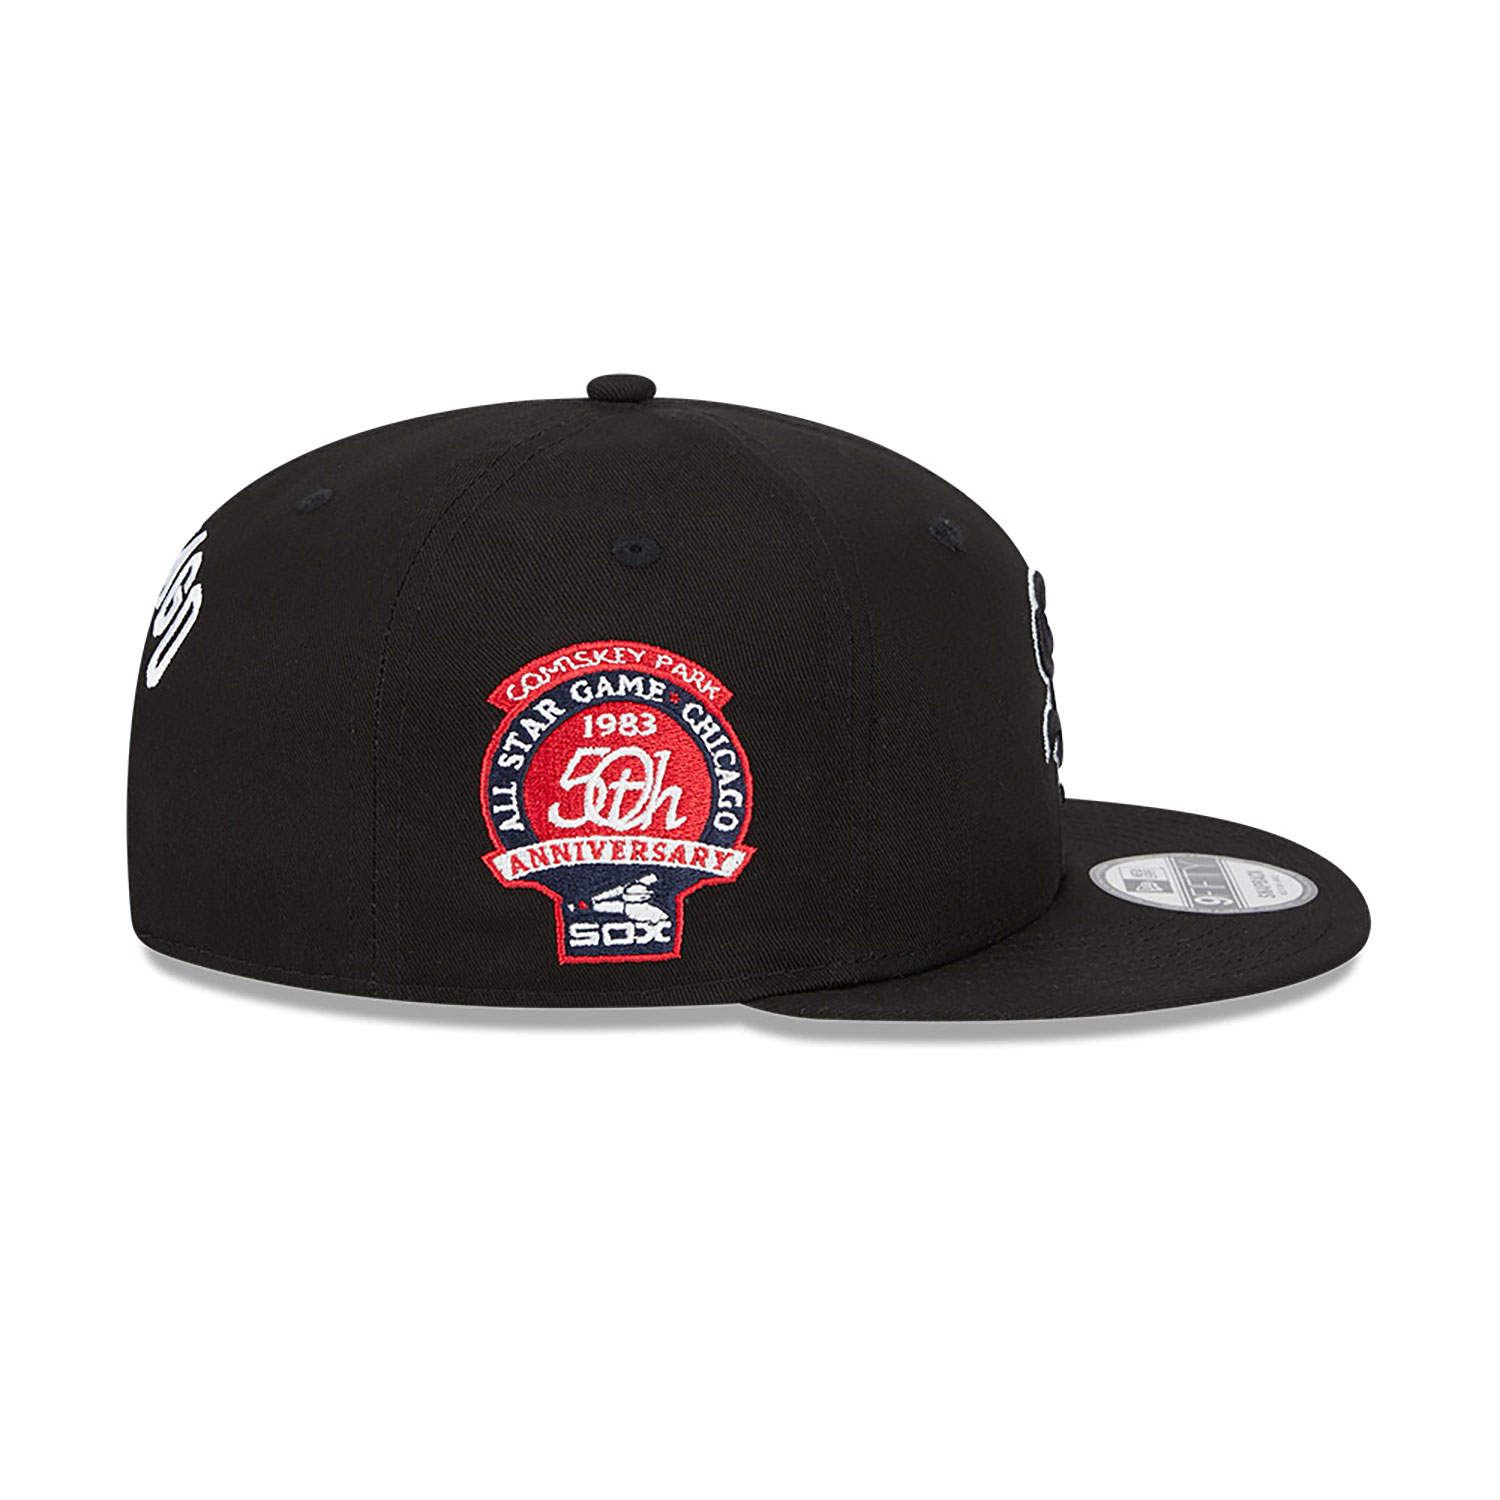 Chicago White Sox Side Patch Black 9FIFTY Snapback Cap